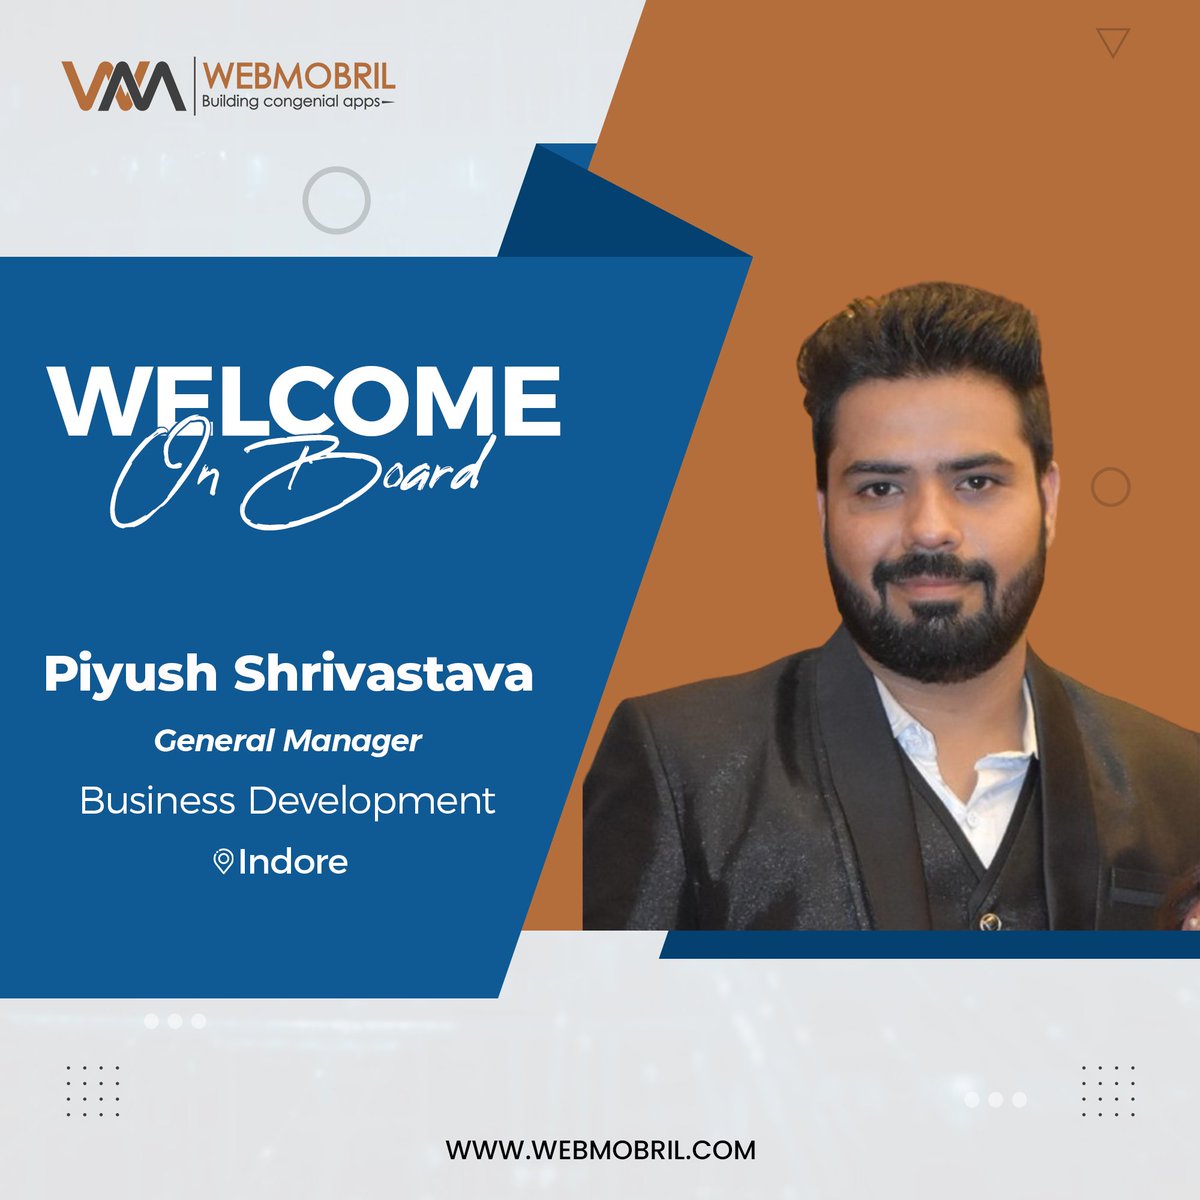 Join us in extending a warm welcome to Mr. Piyush Shrivastav, who joins us as our General Manager of Business Development! With his proven track record and passion for innovation, we're geared up for remarkable achievements ahead. Let's soar together! 
#WelcomeAboard #webmobril